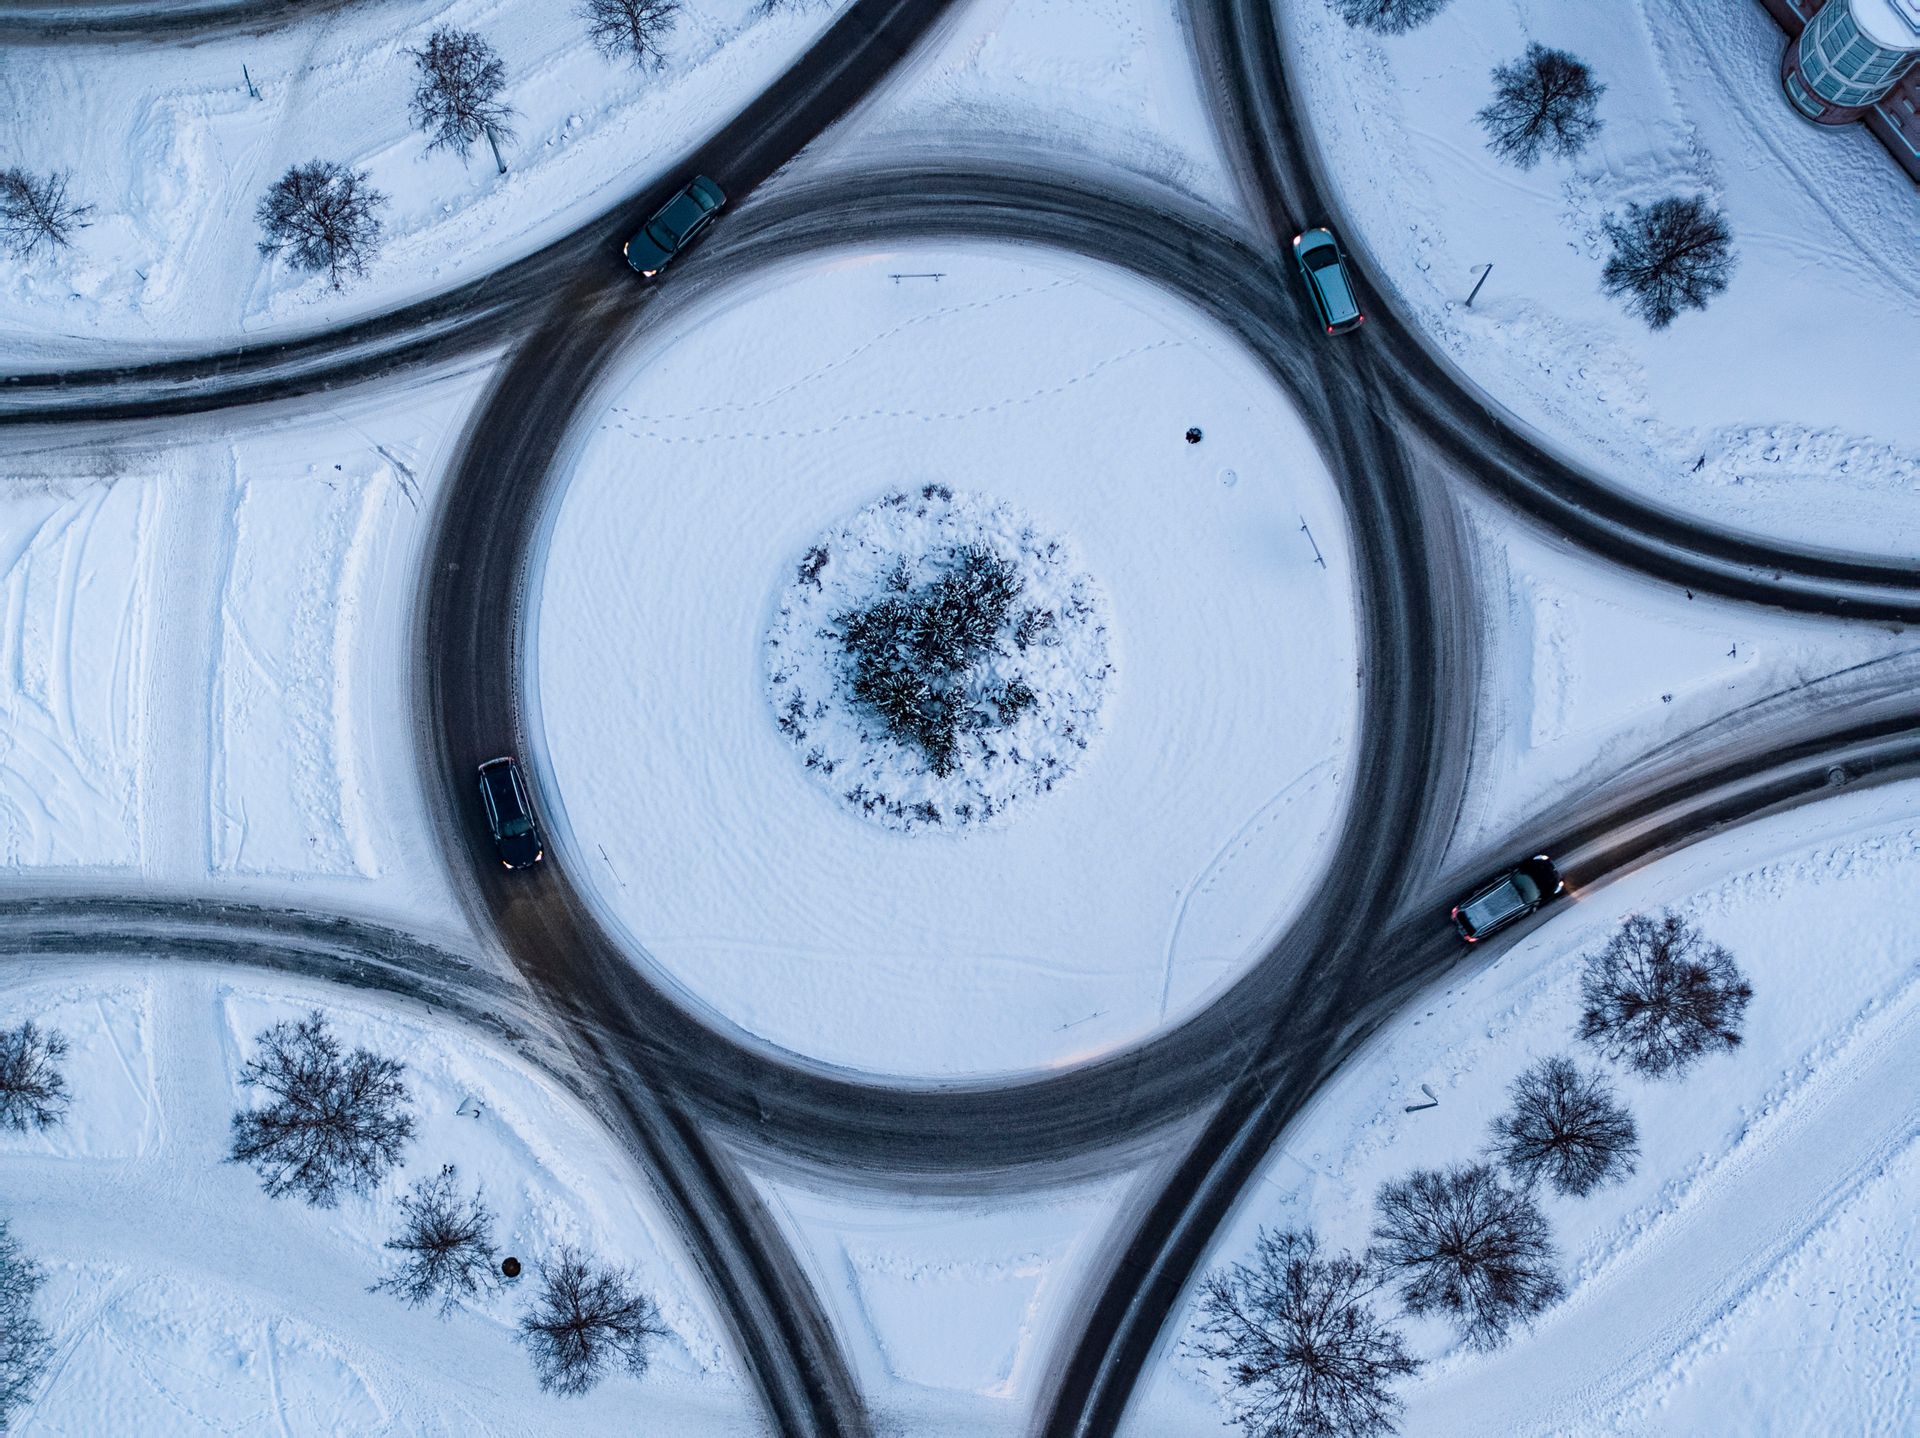 A view from above on a snowy roundabout